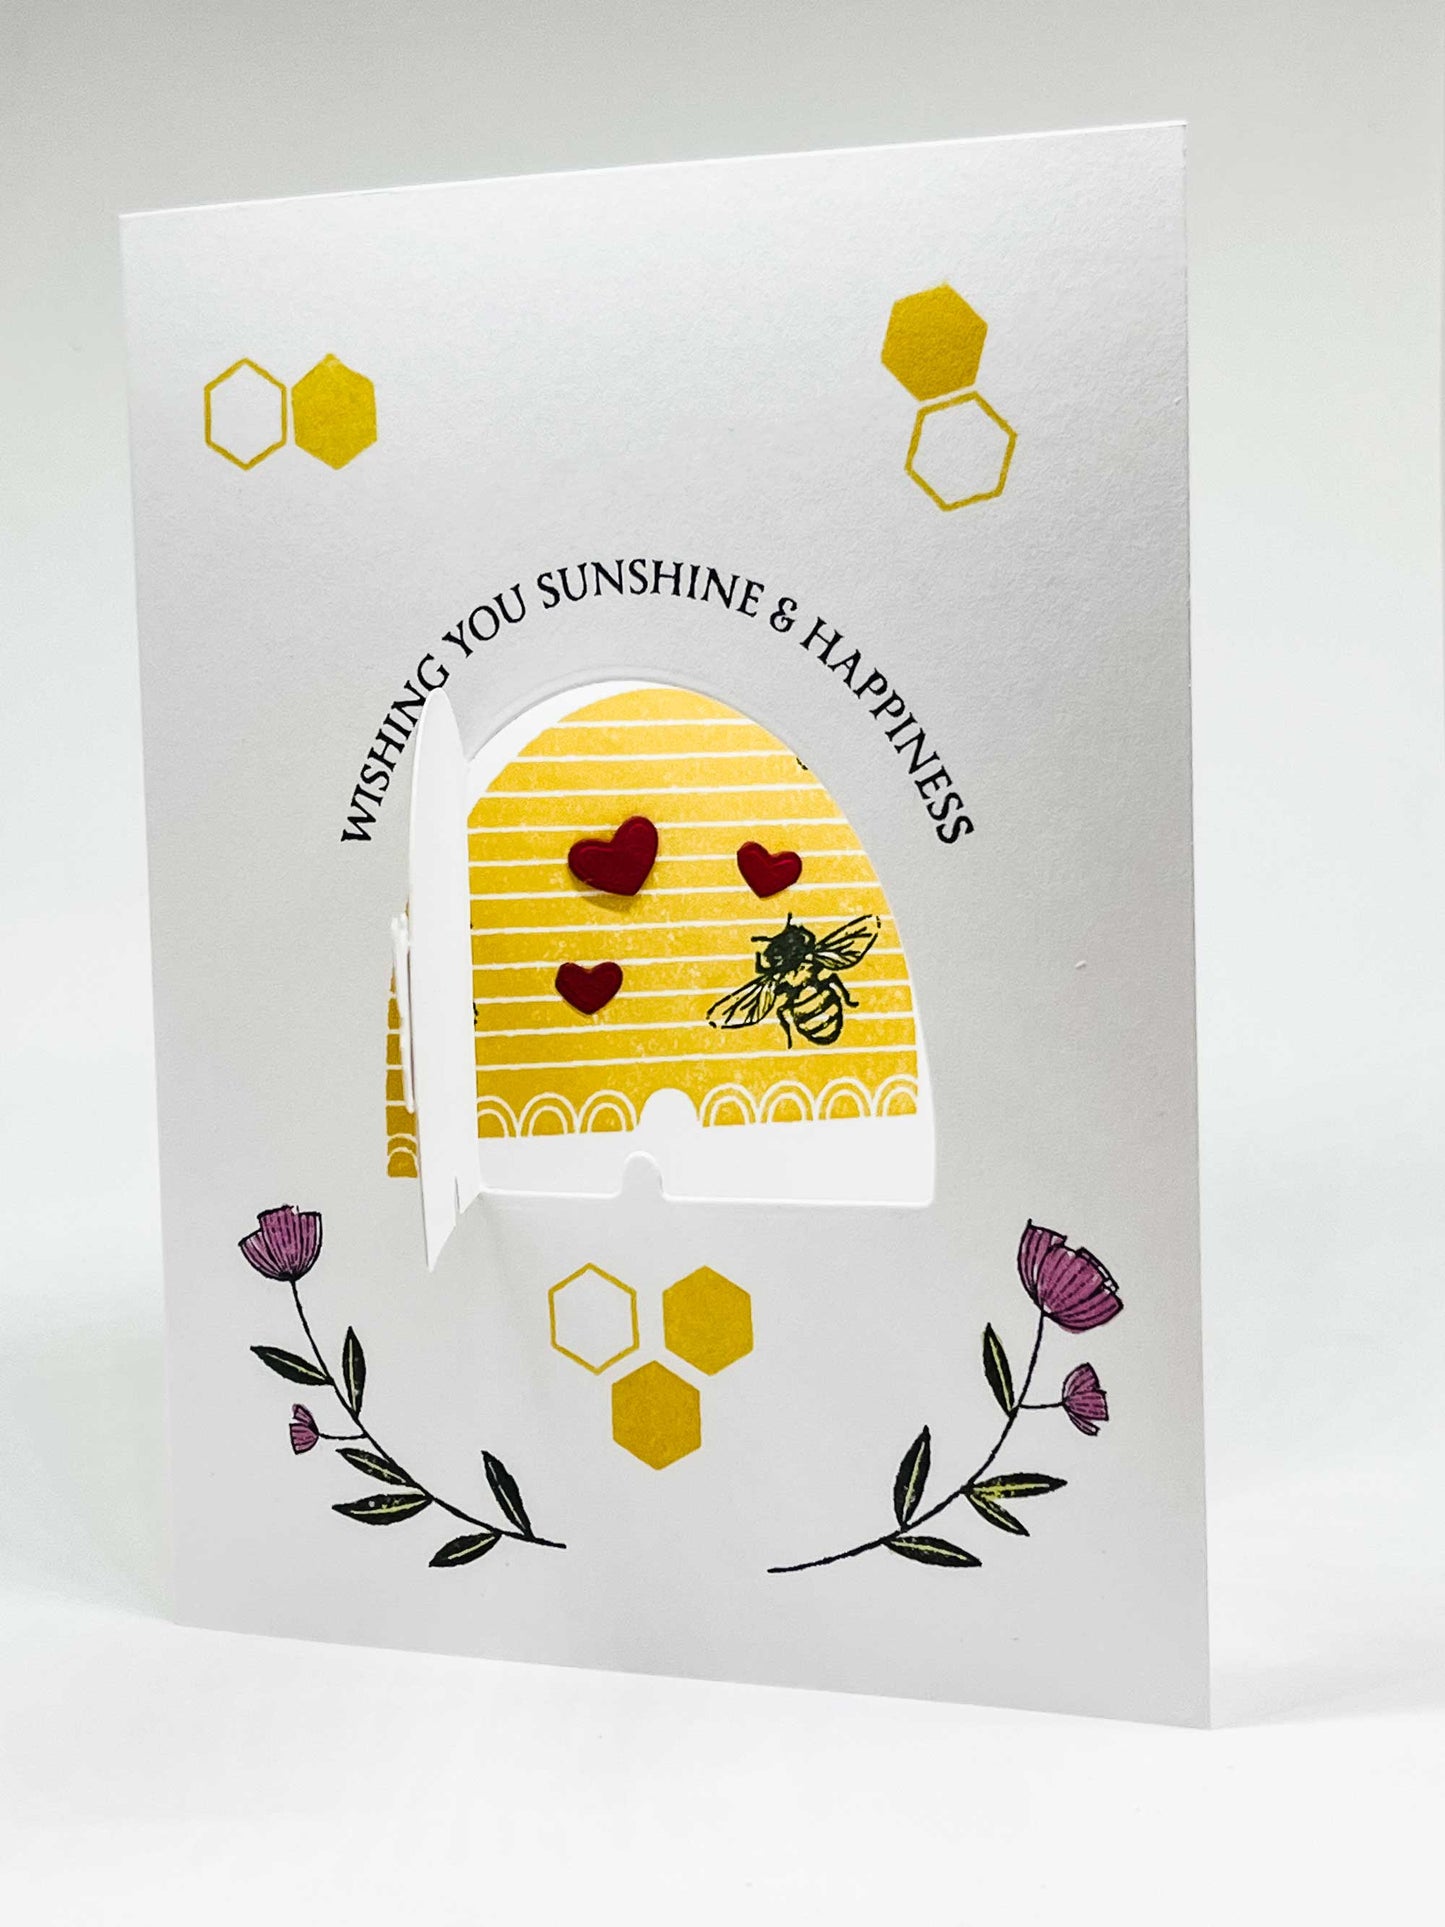 Pop-up greeting card with honeybee on a hive surrounded by hearts and flowers and text that wishing you sunshine & happiness